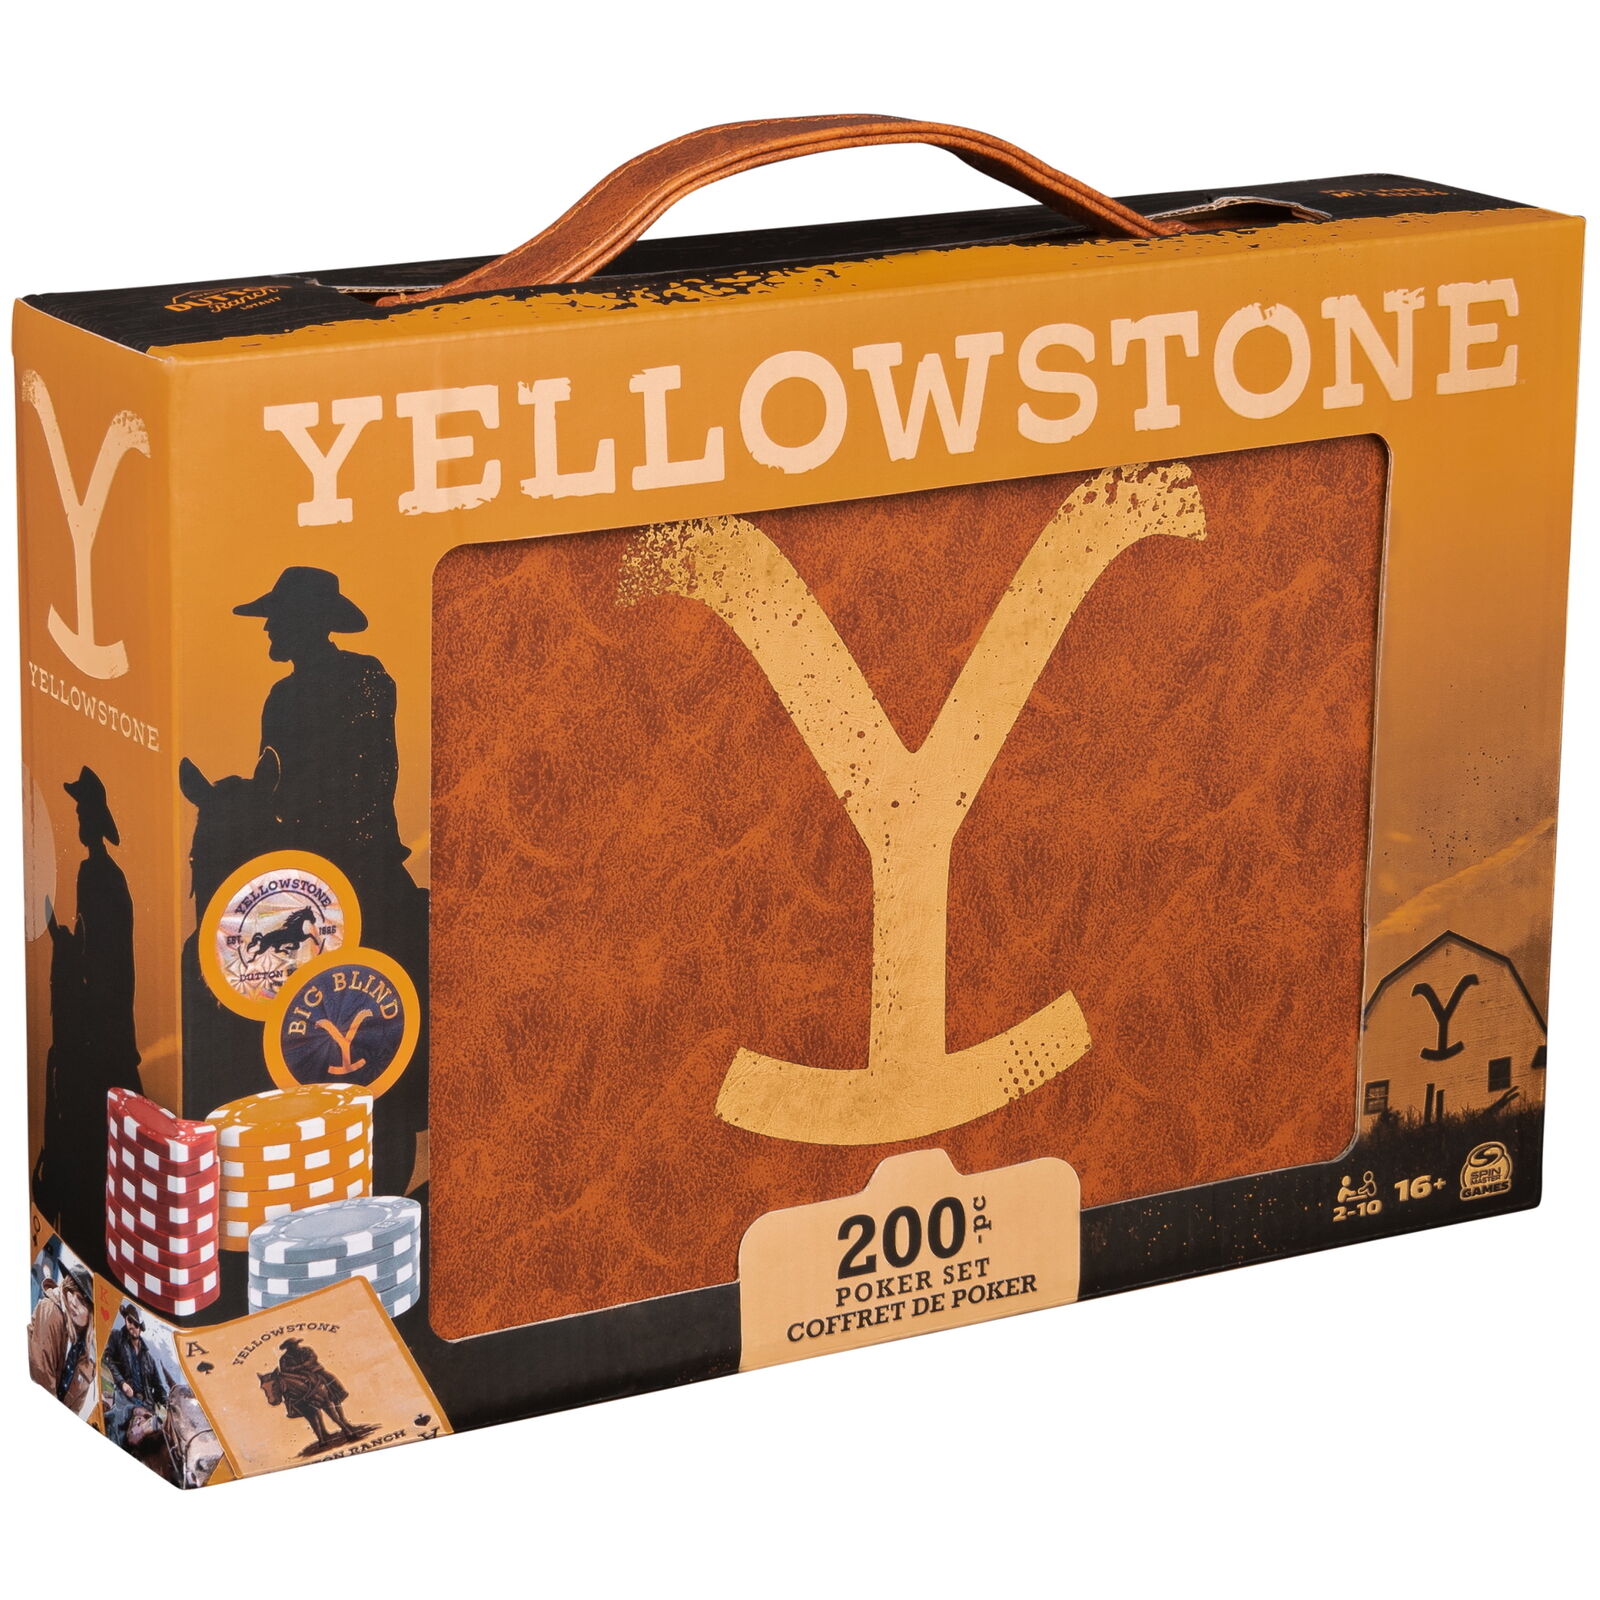 Yellowstone, 200-Piece Poker with Custom Carrying Case for Ages 16+